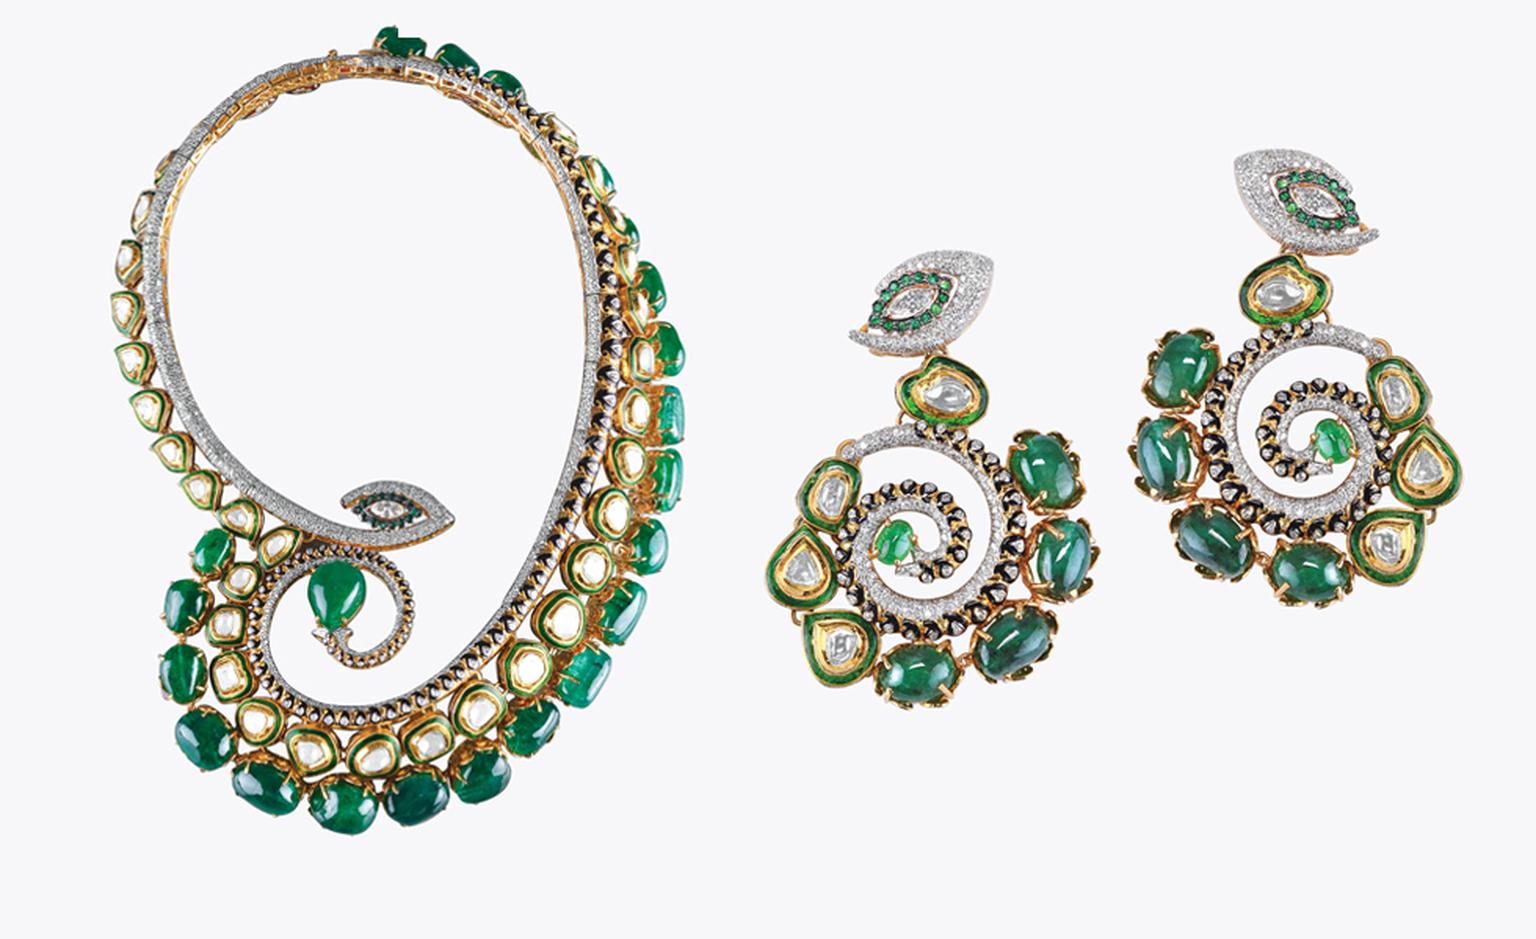 Sawansukha,Kolkata. Necklace and earrings, Zambian emeralds and diamonds in yellow gold. Sold as set, price from $120,00.